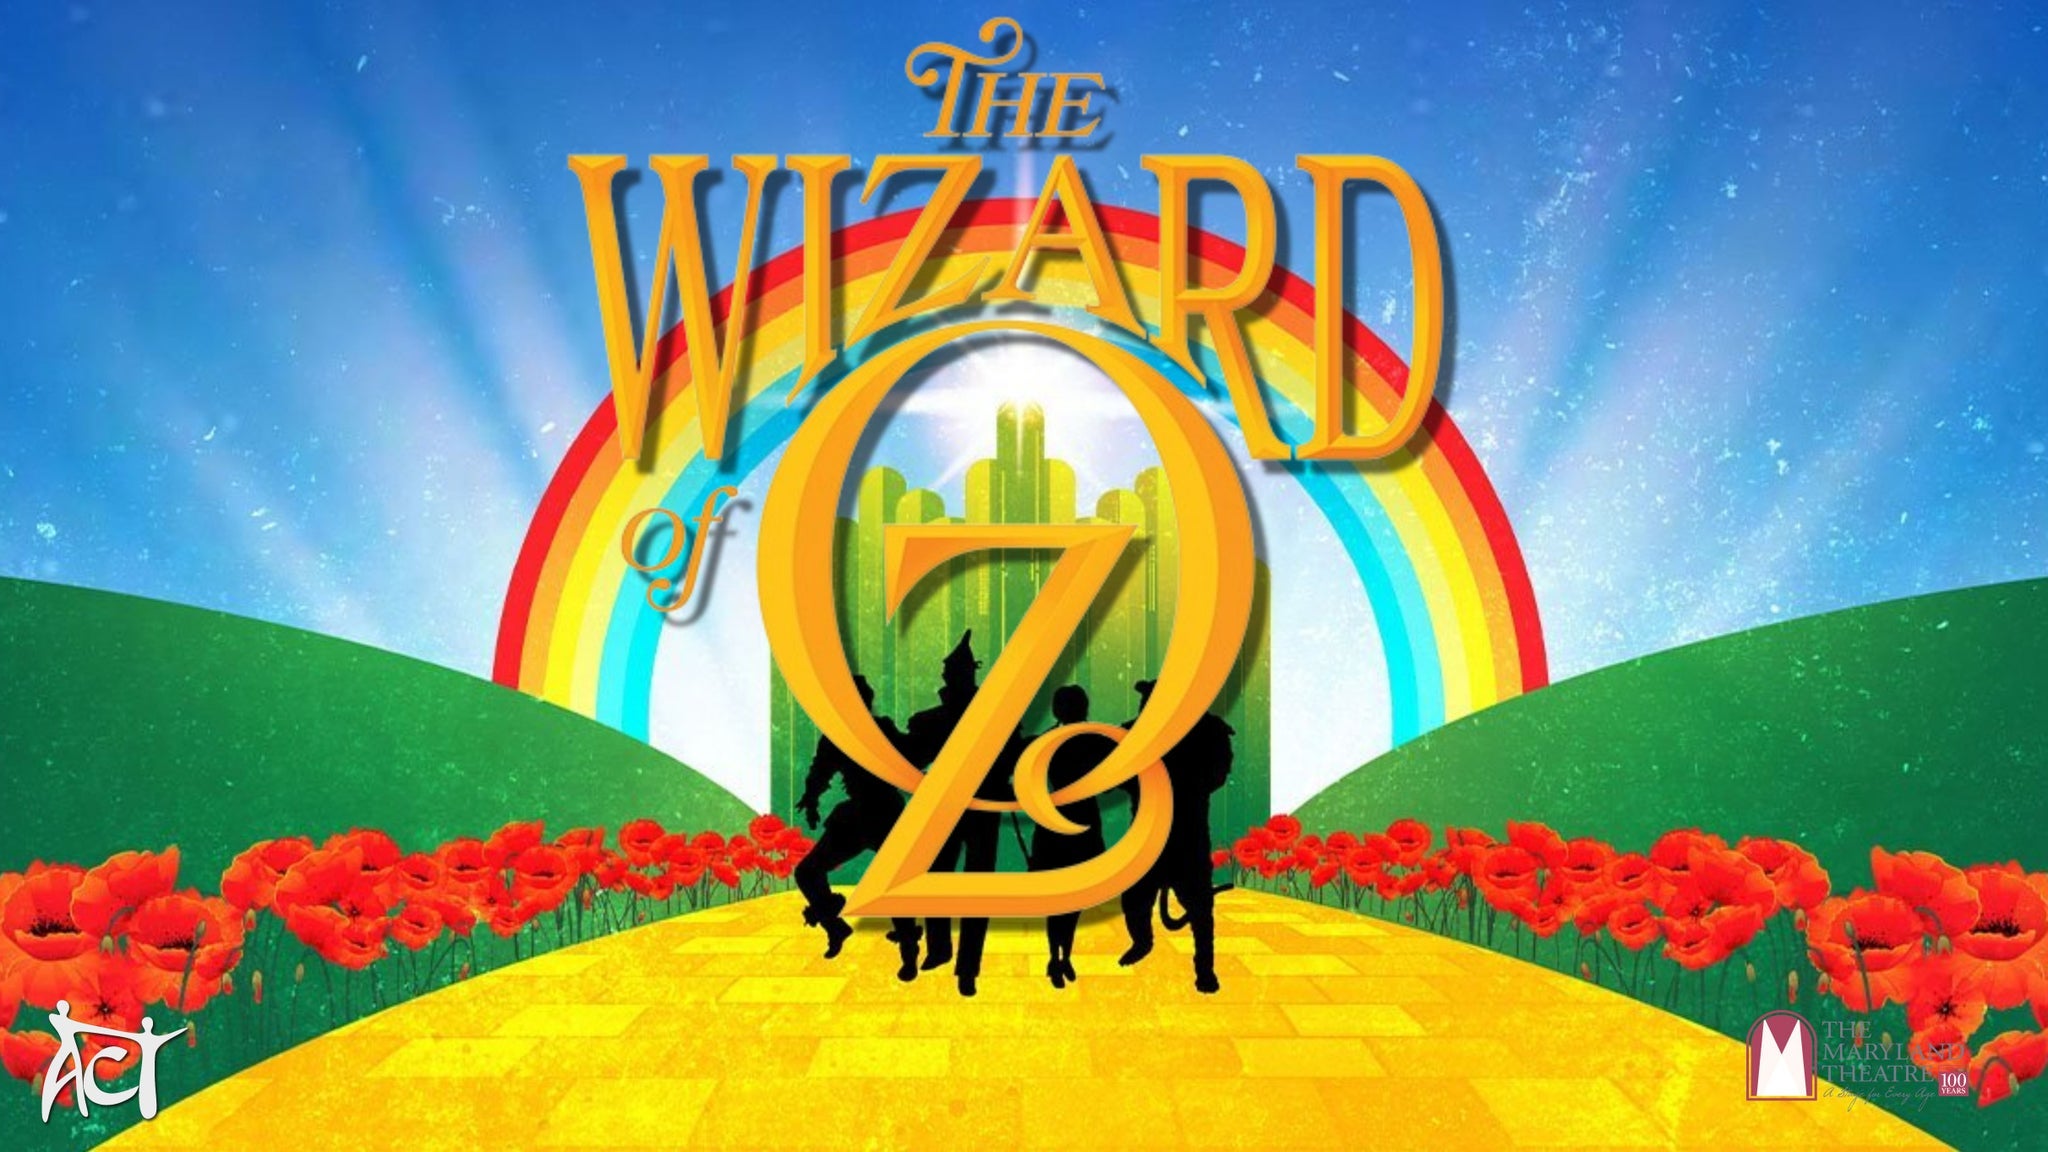 The Wizard of Oz Presented by ACT in Hagerstown promo photo for MD Theatre presale offer code